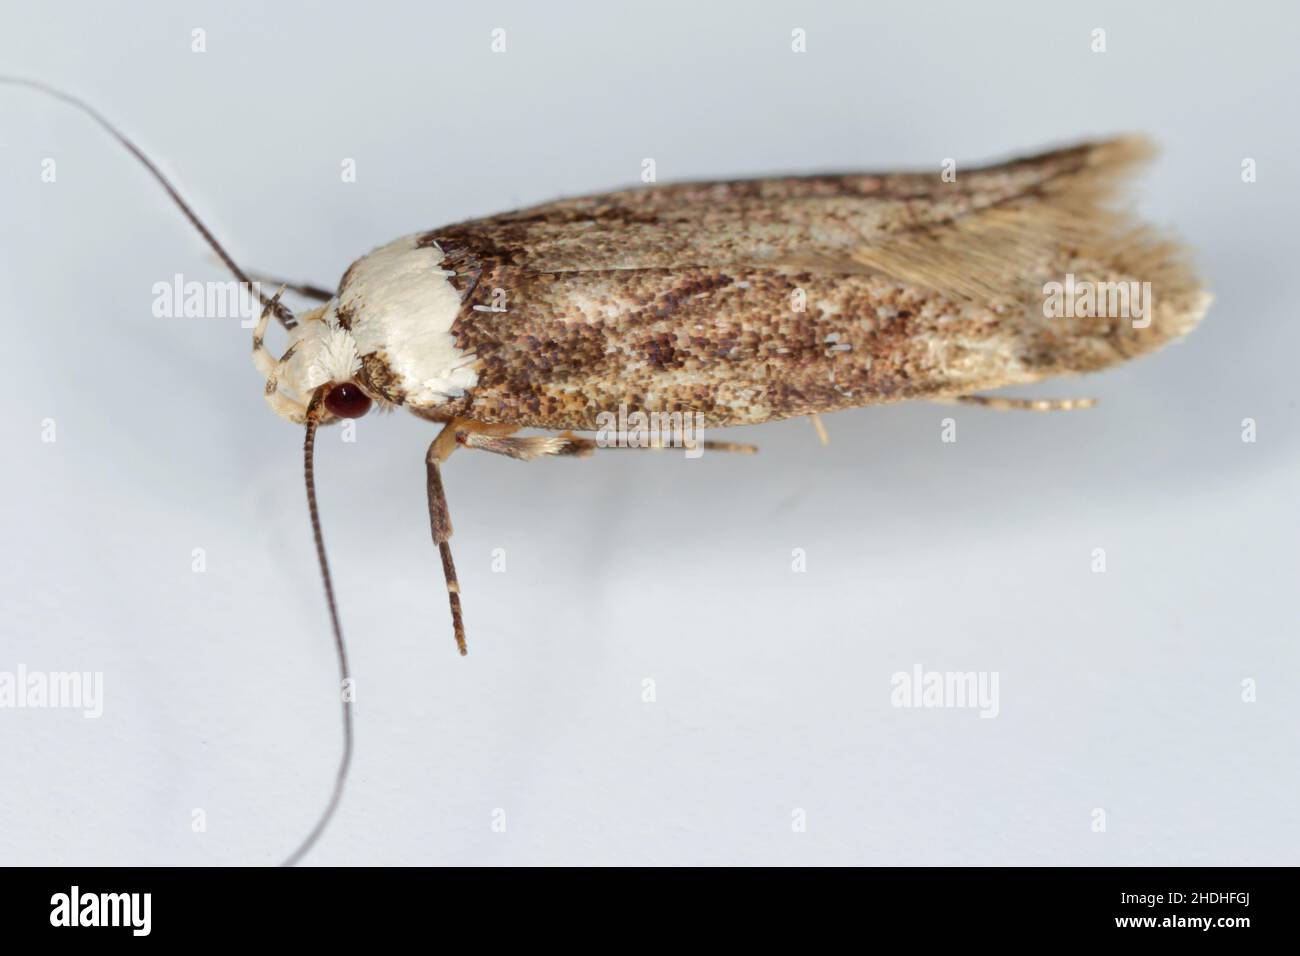 A white shouldered house moth - Endrosis sarcitrella a common house pest that breeds all year round and it is fond of grain, cereals, wool and other f Stock Photo